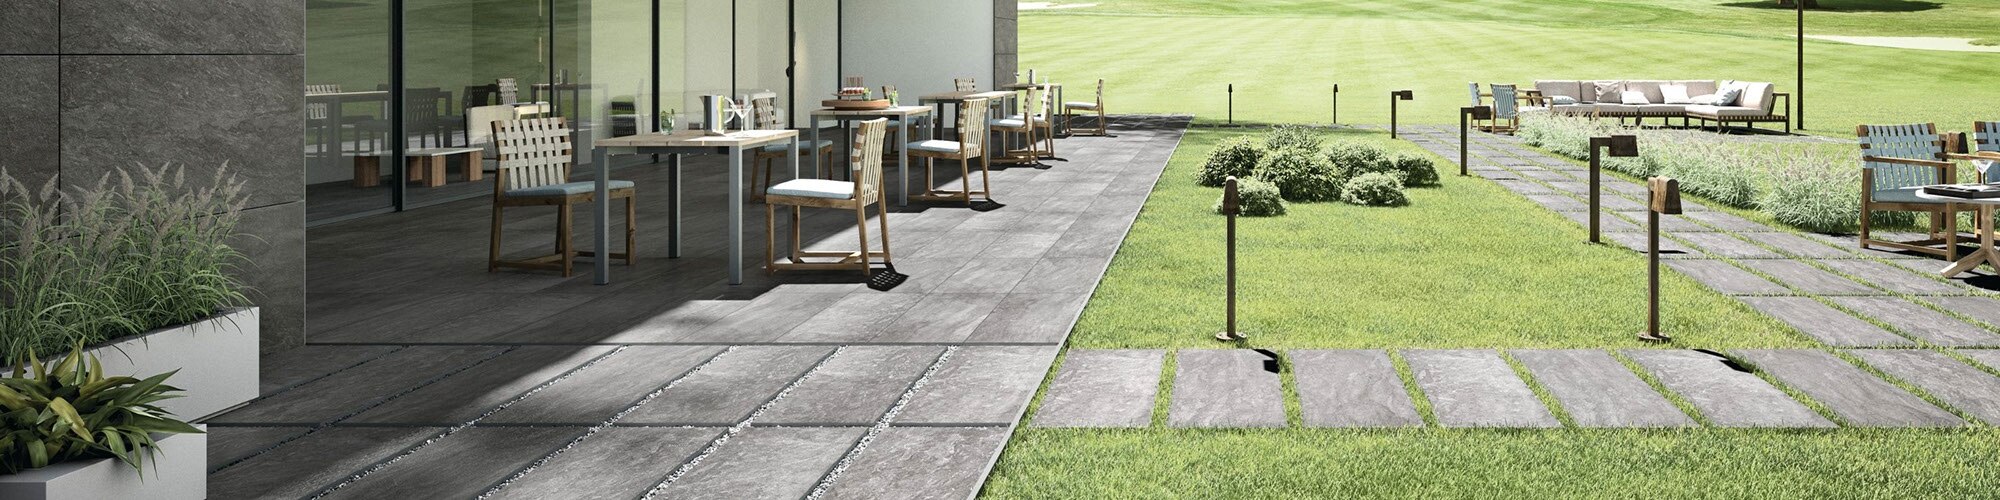 Golf club with stone-look gray porcelain cladding, outdoor dining room with gray stone-look tile flooring with matching 2CM paver pathway set in grass.